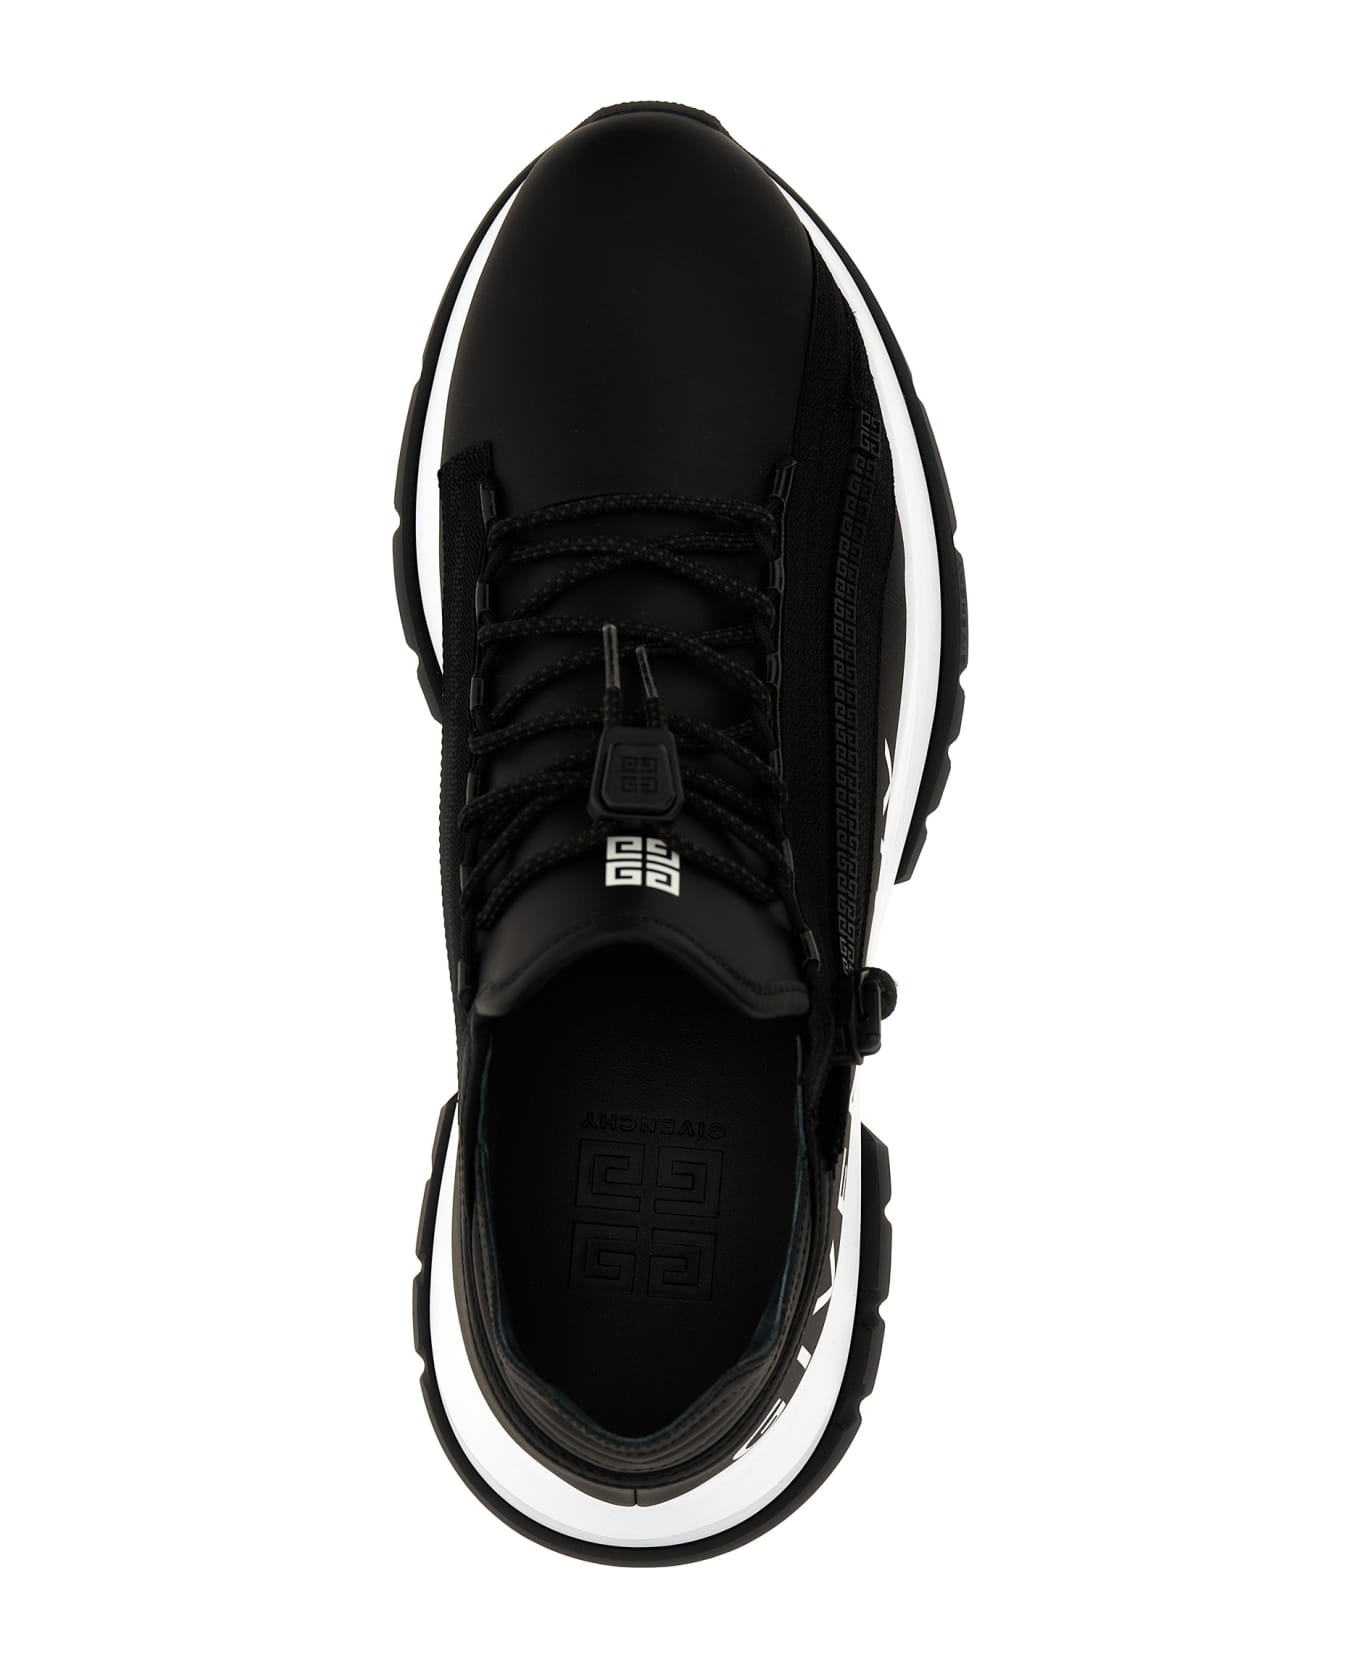 Givenchy 'spectre' Sneakers - White/Black